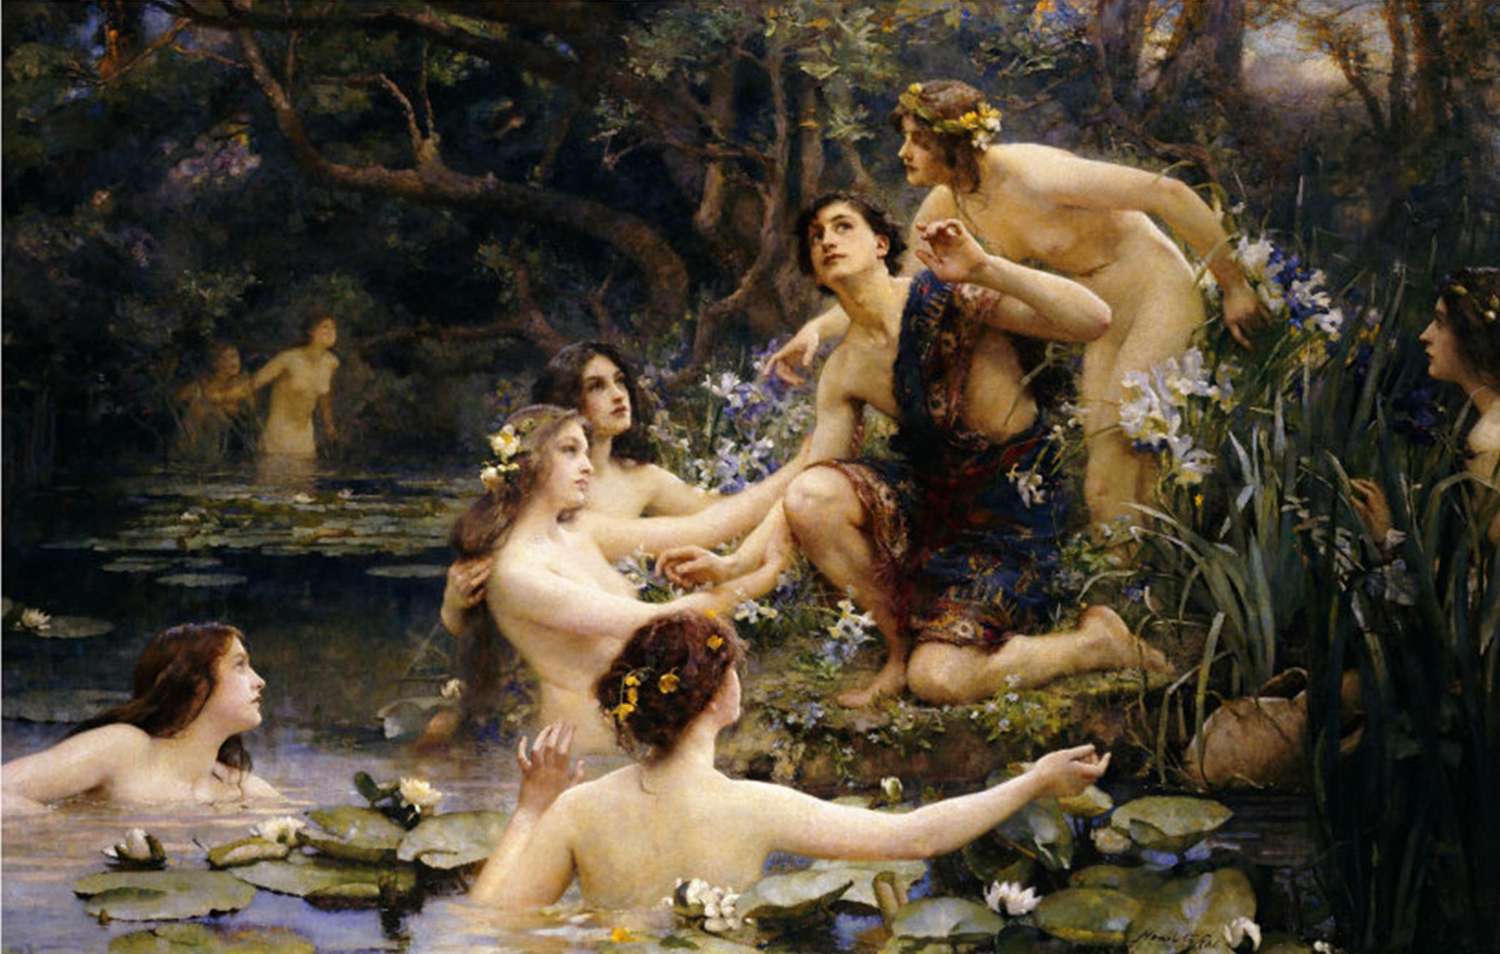 Who Are the Nymphs in Greek Mythology?